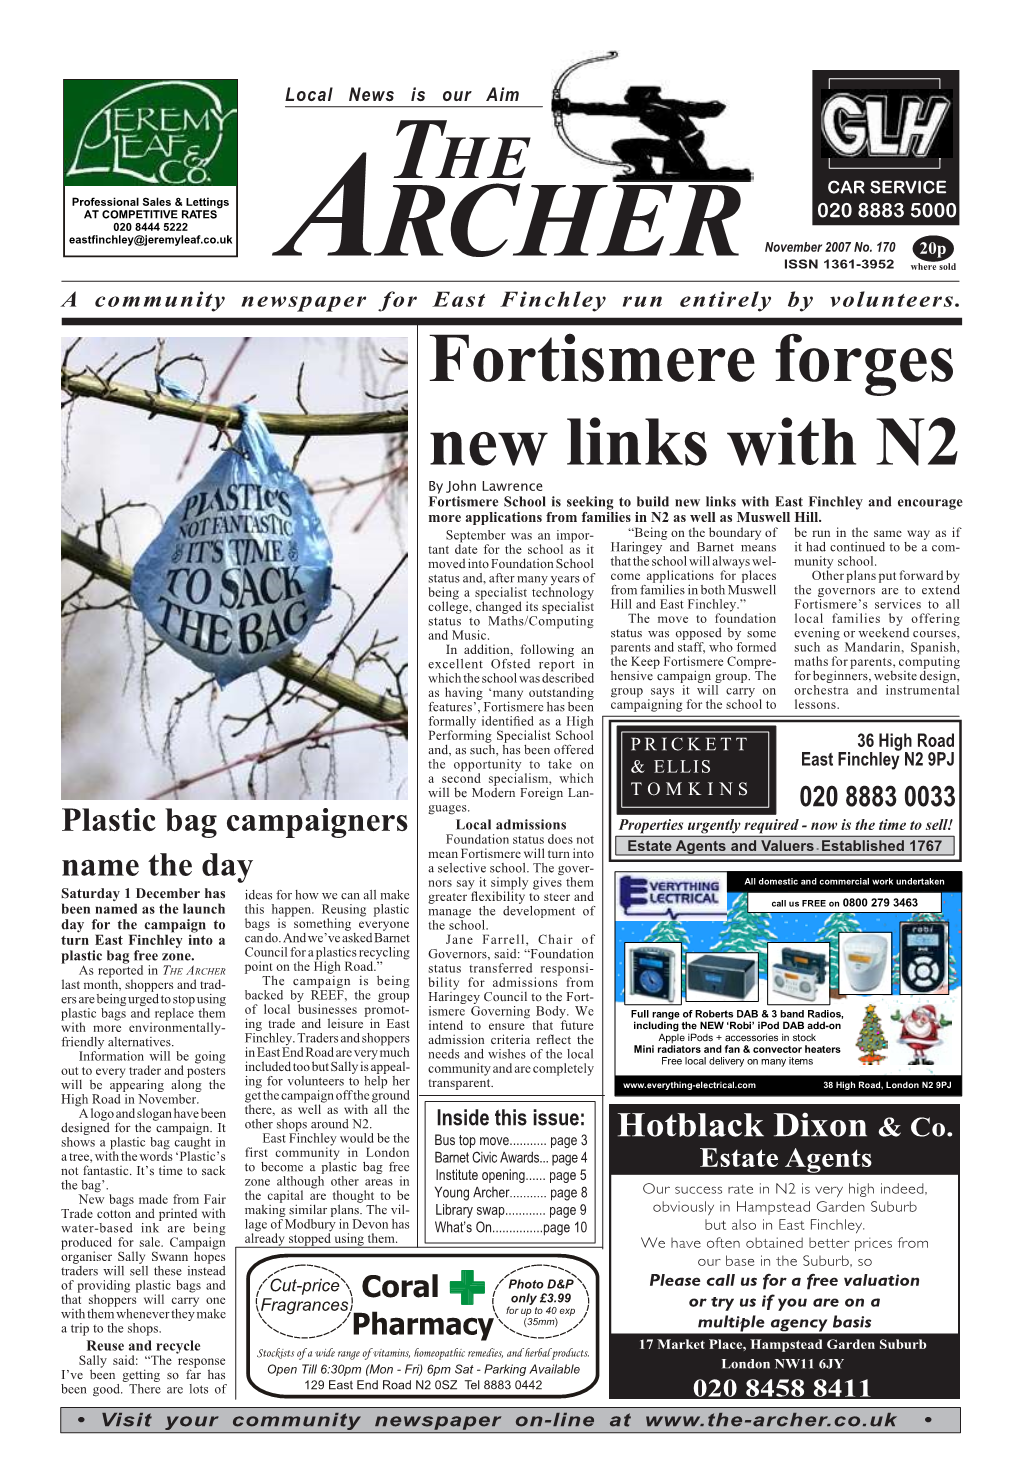 Fortismere Forges New Links with N2